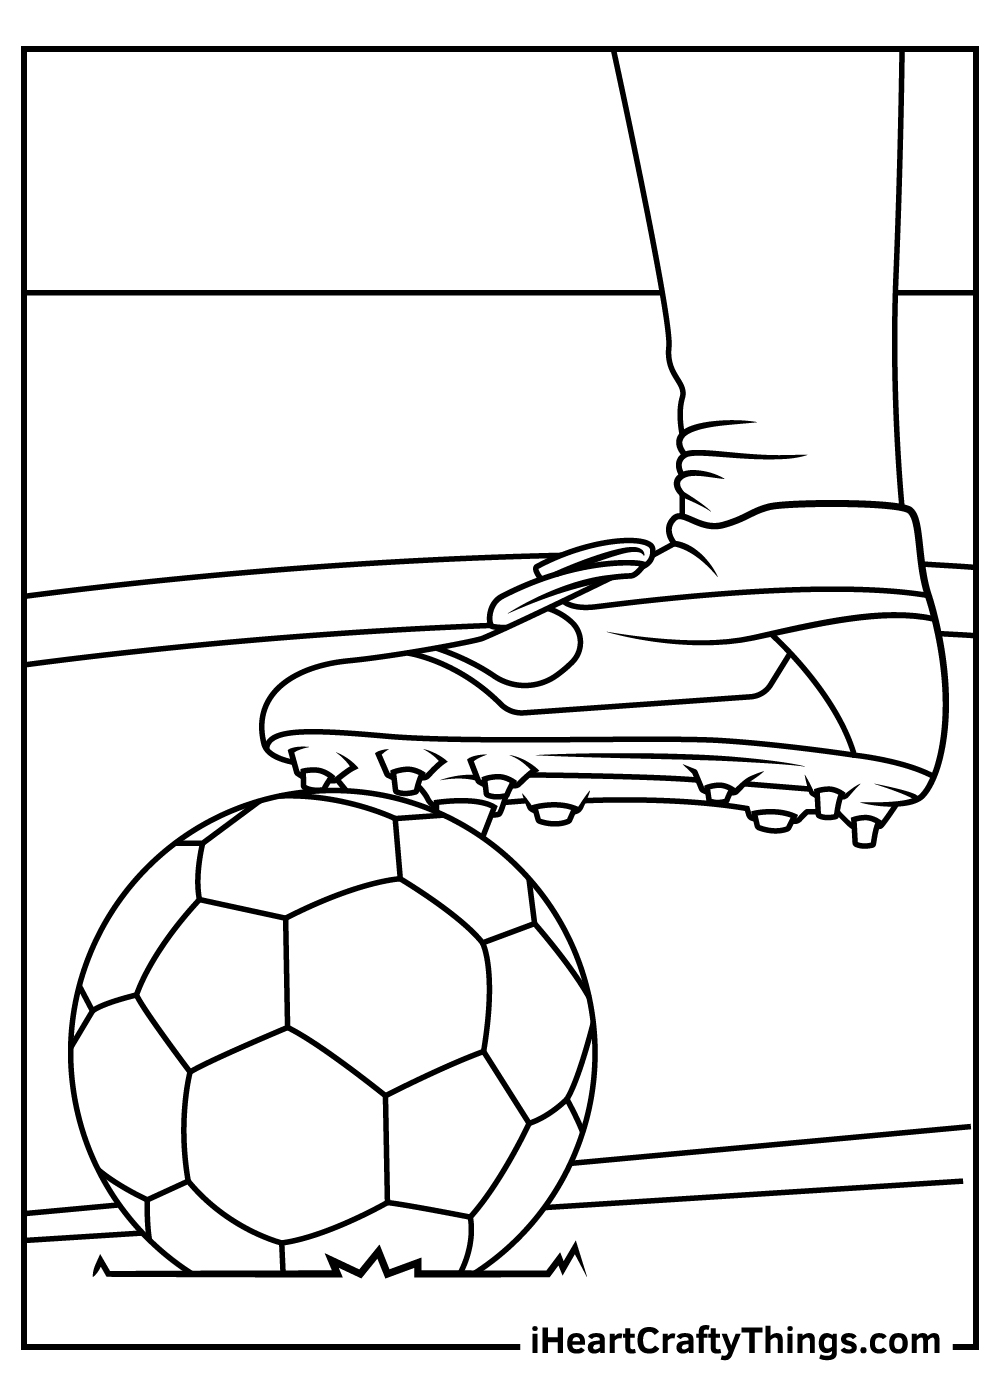 Soccer coloring pages free printables